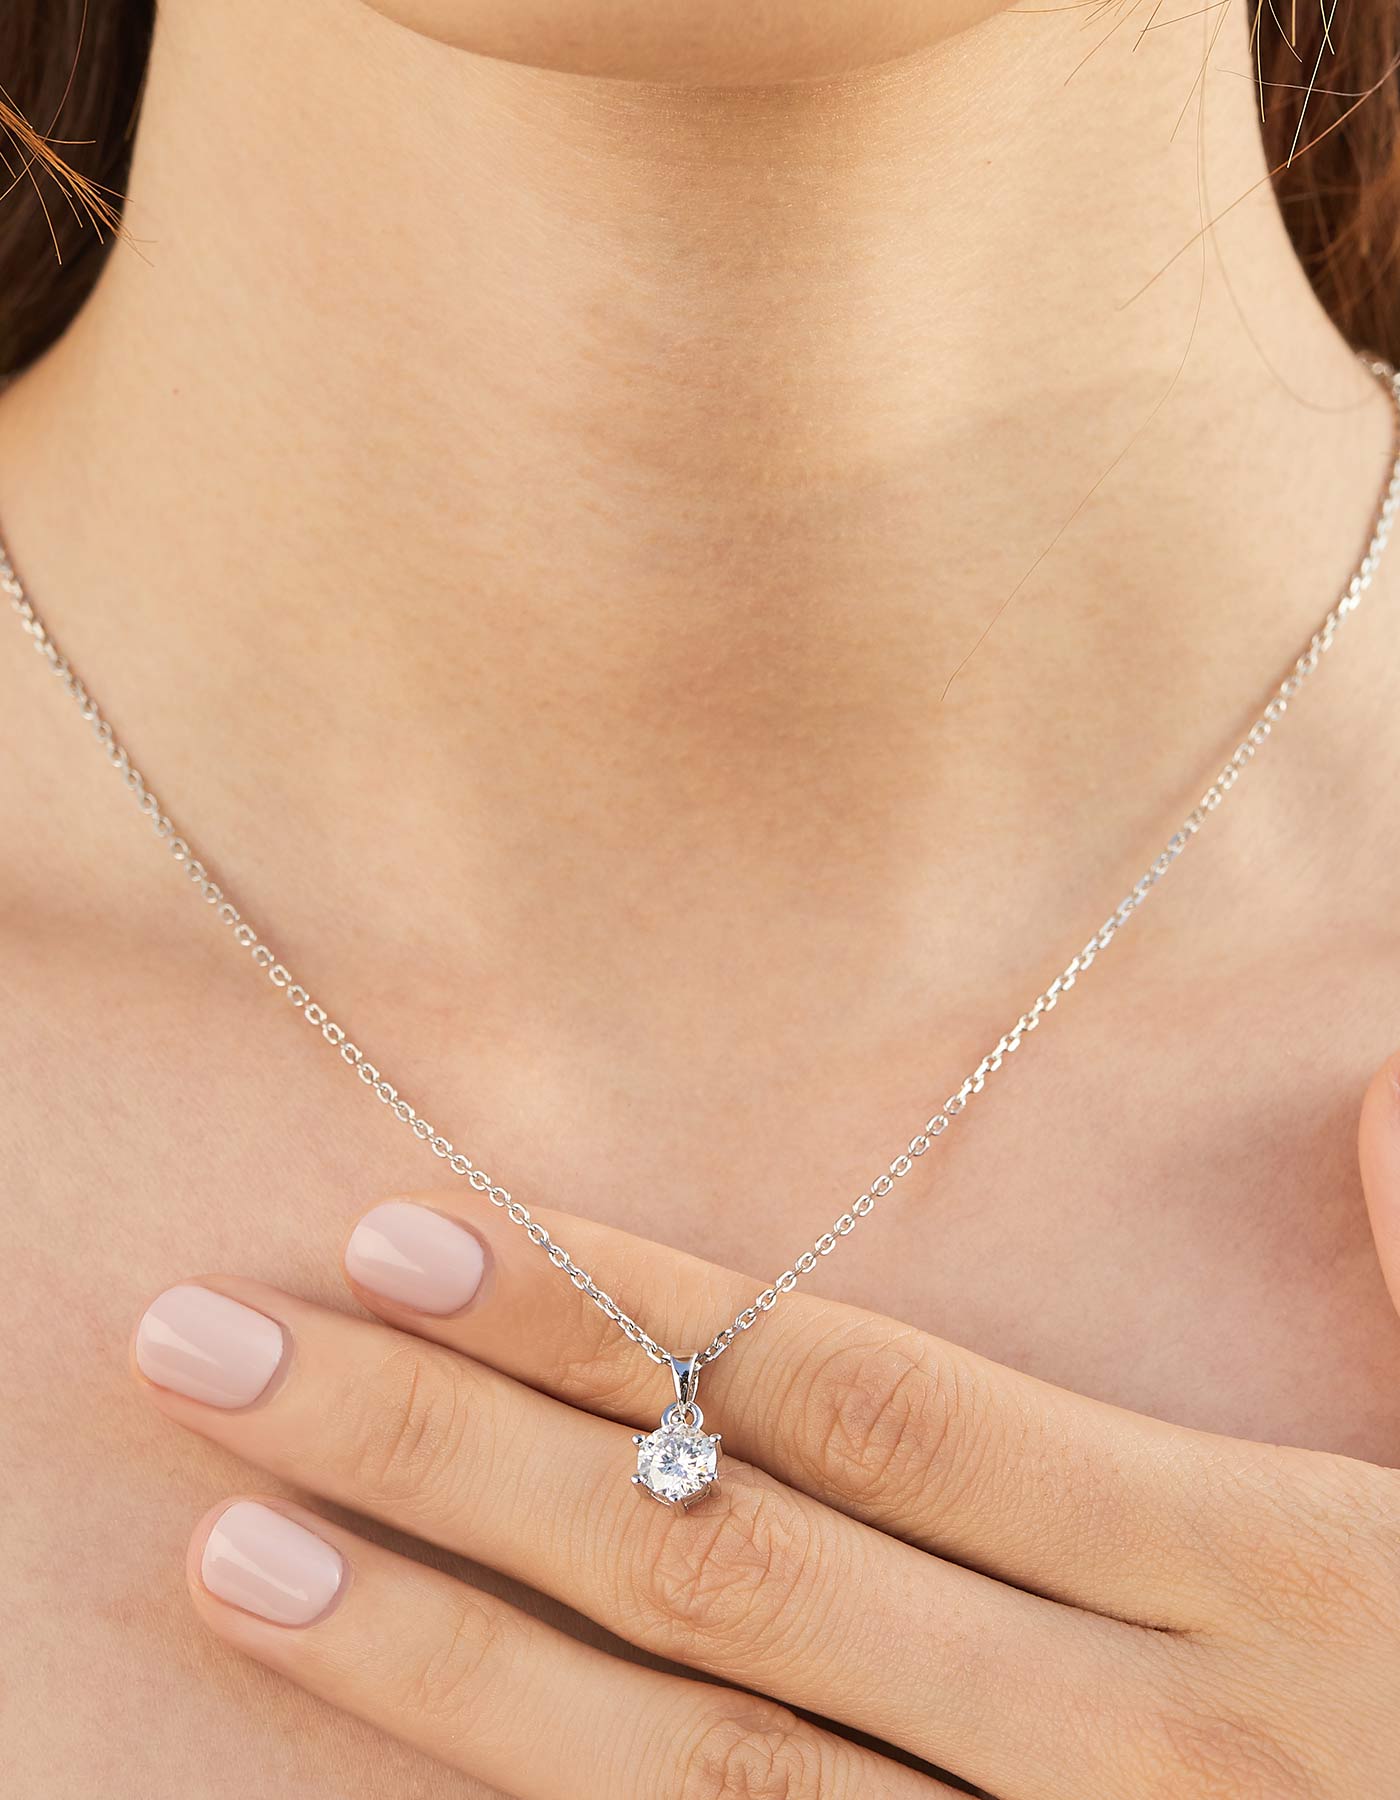 MomentWish Sterling Silver Solitaire Necklace